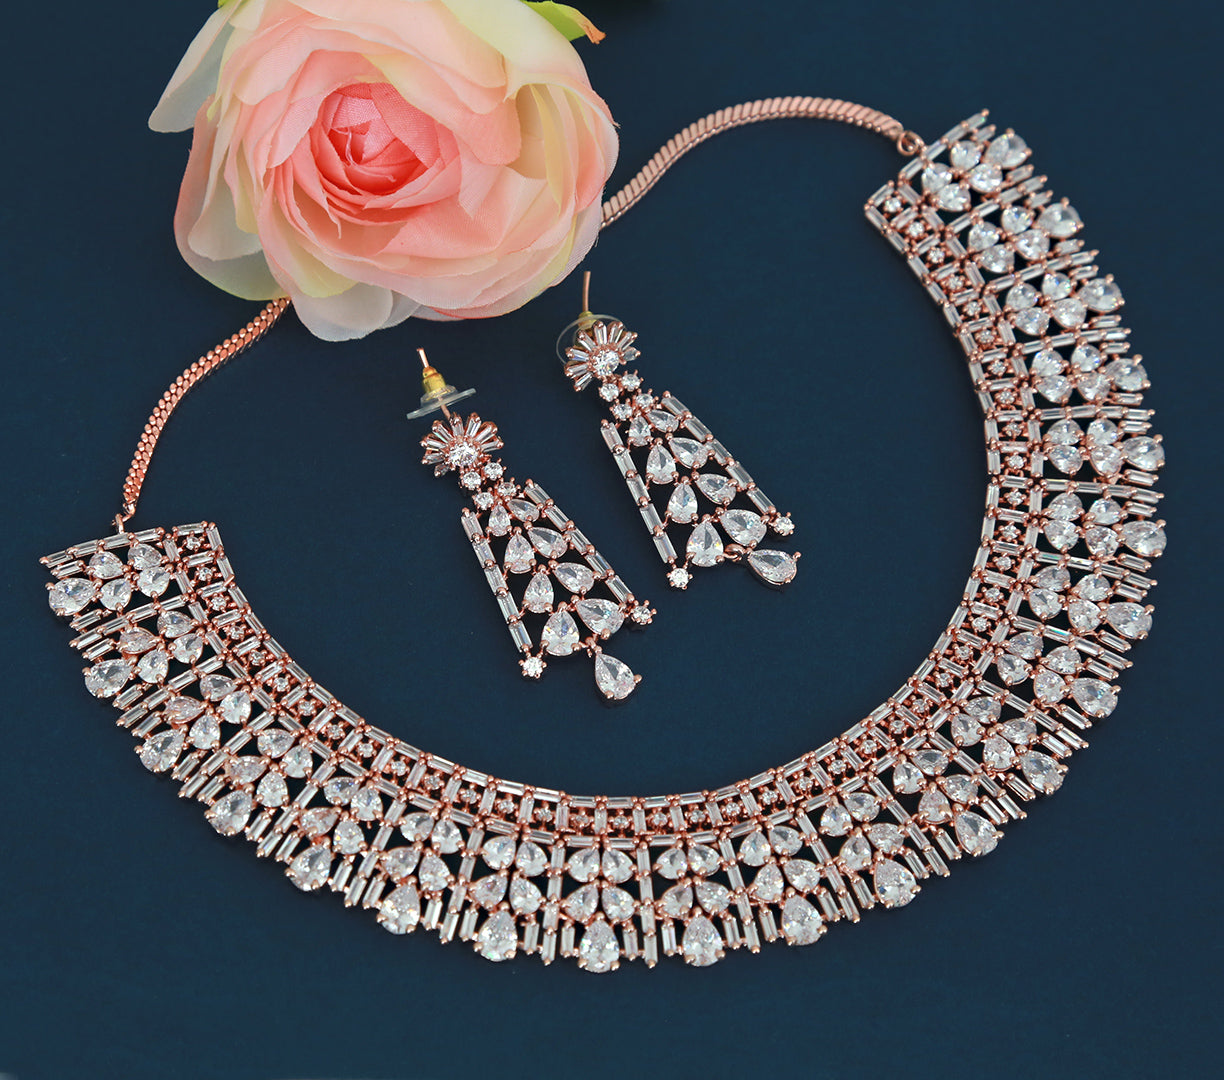 Rose gold American diamond set | Crystal Ruby Red statement necklace | Indian wedding jewelry set | Trendy  south Indian jewelry design |